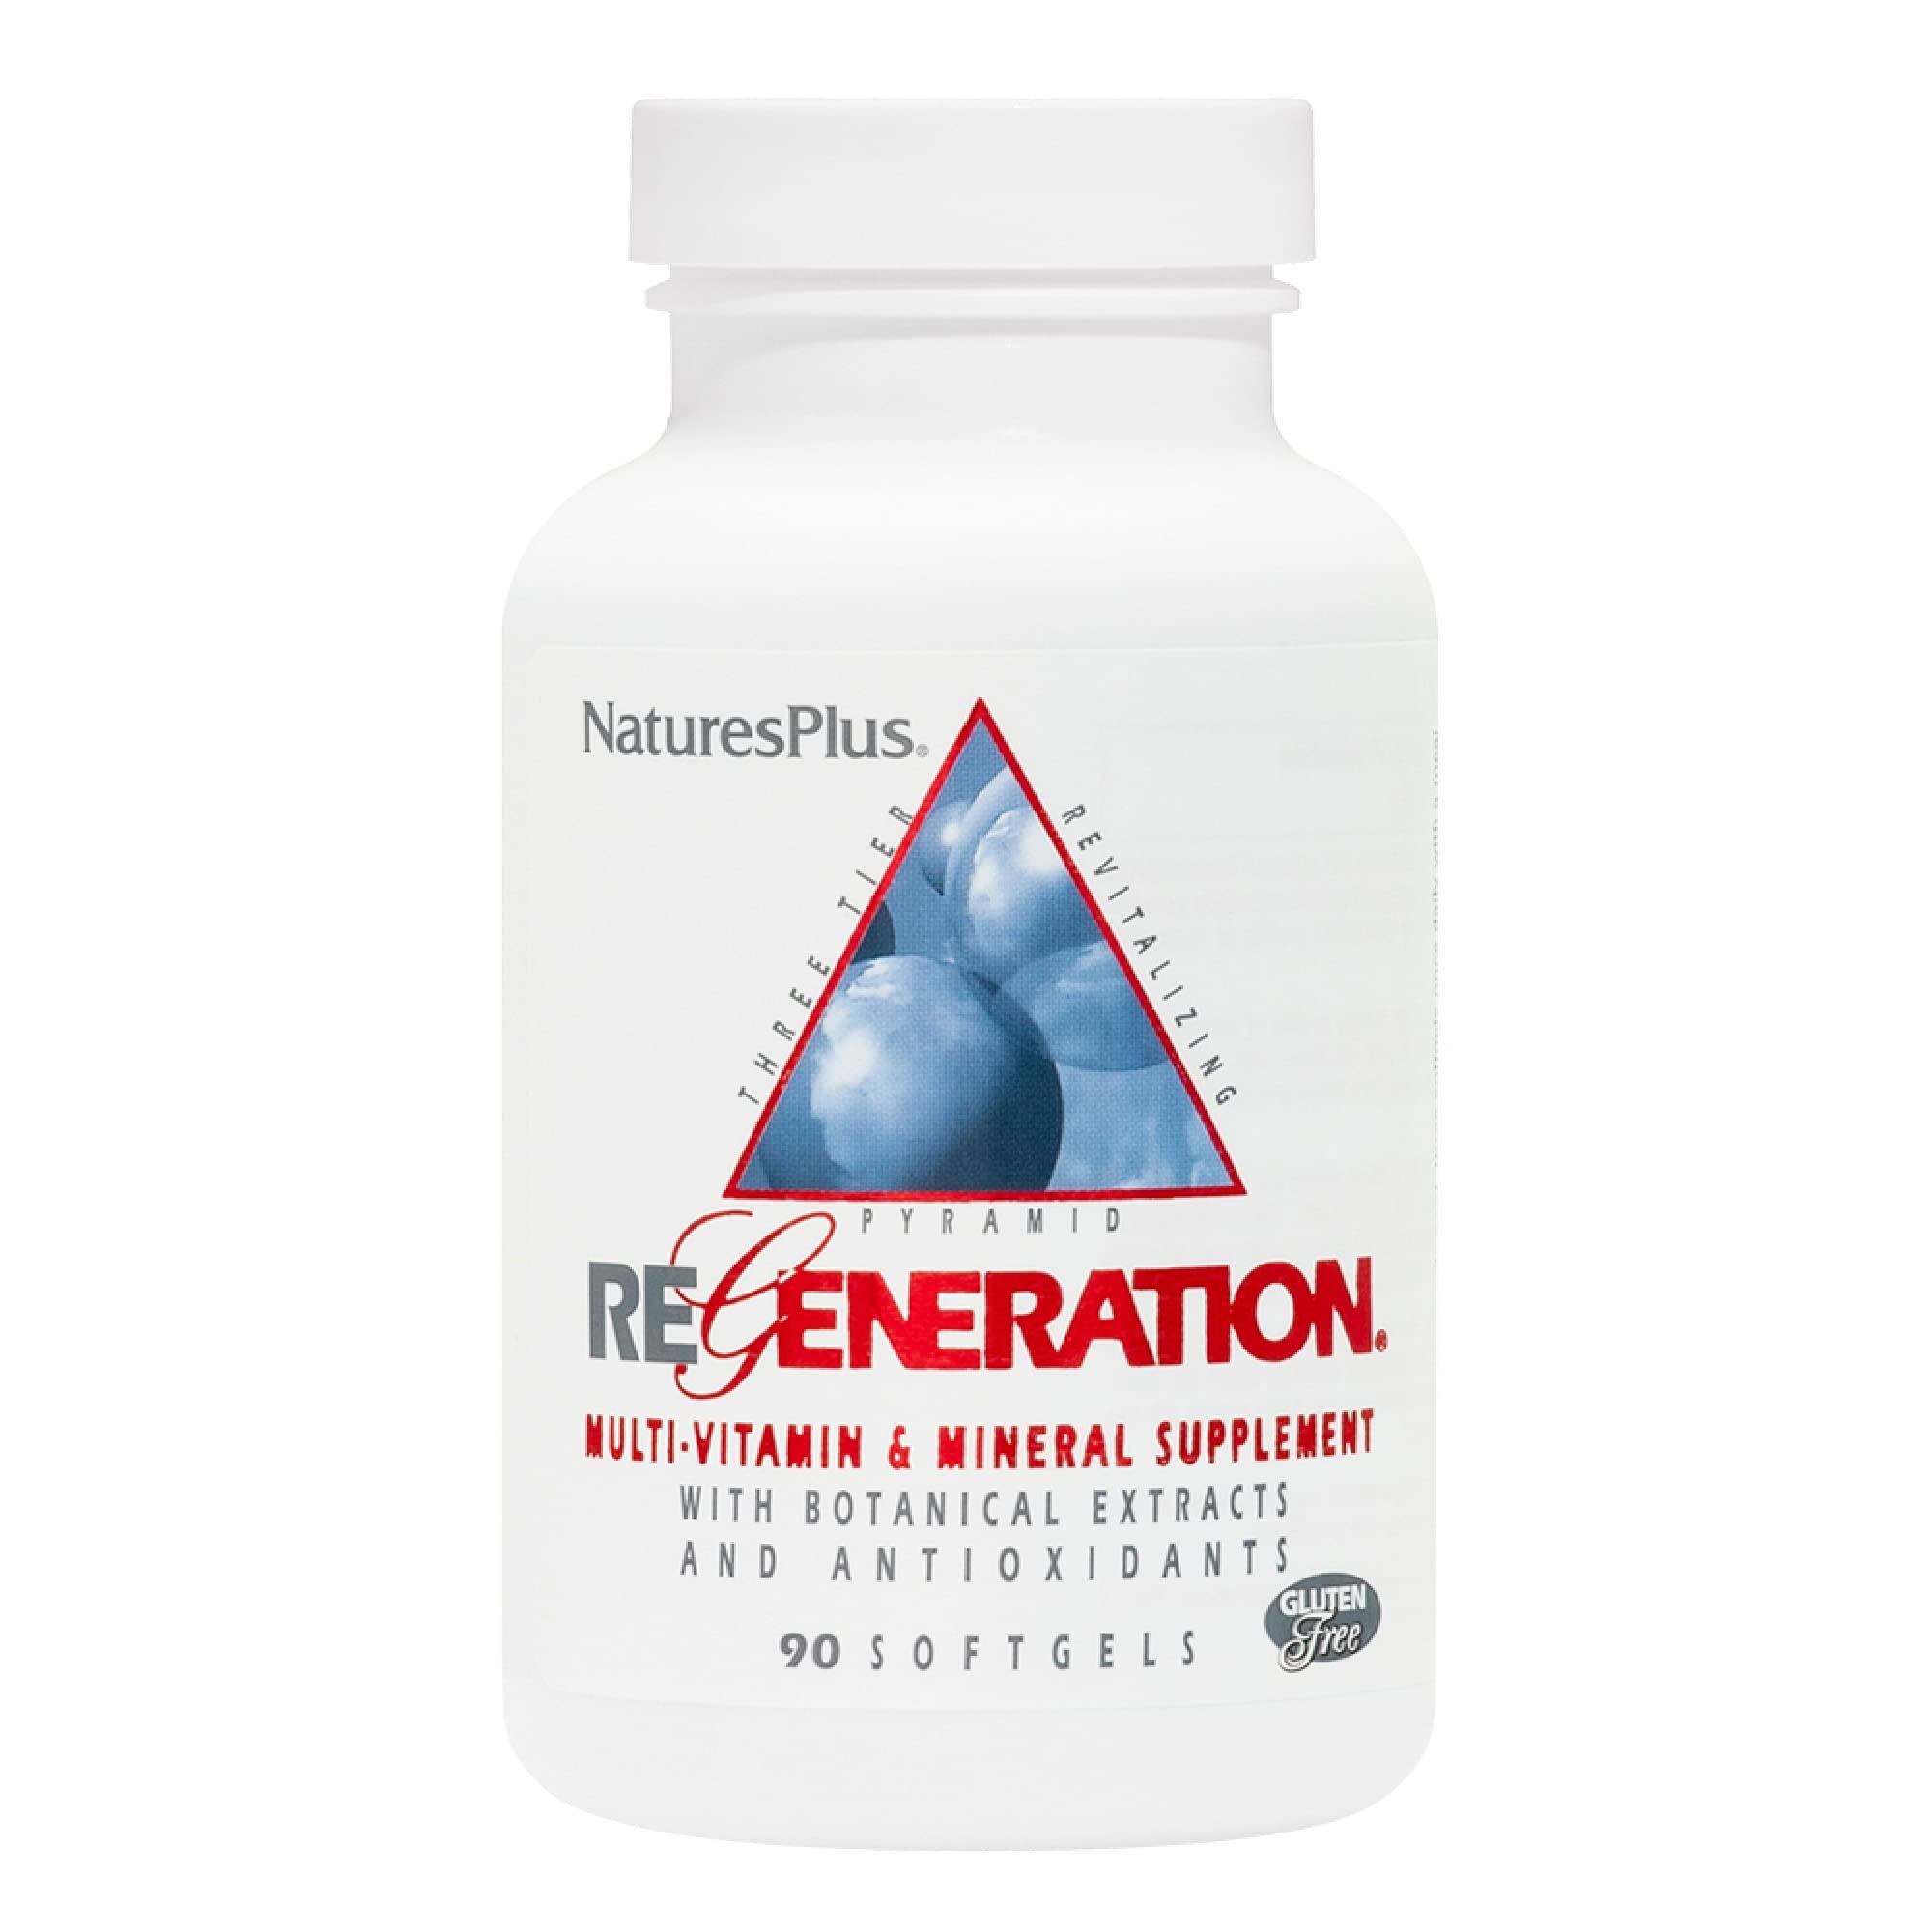 Regeneration Multi-Vitamin and Mineral Supplement - 90 Count